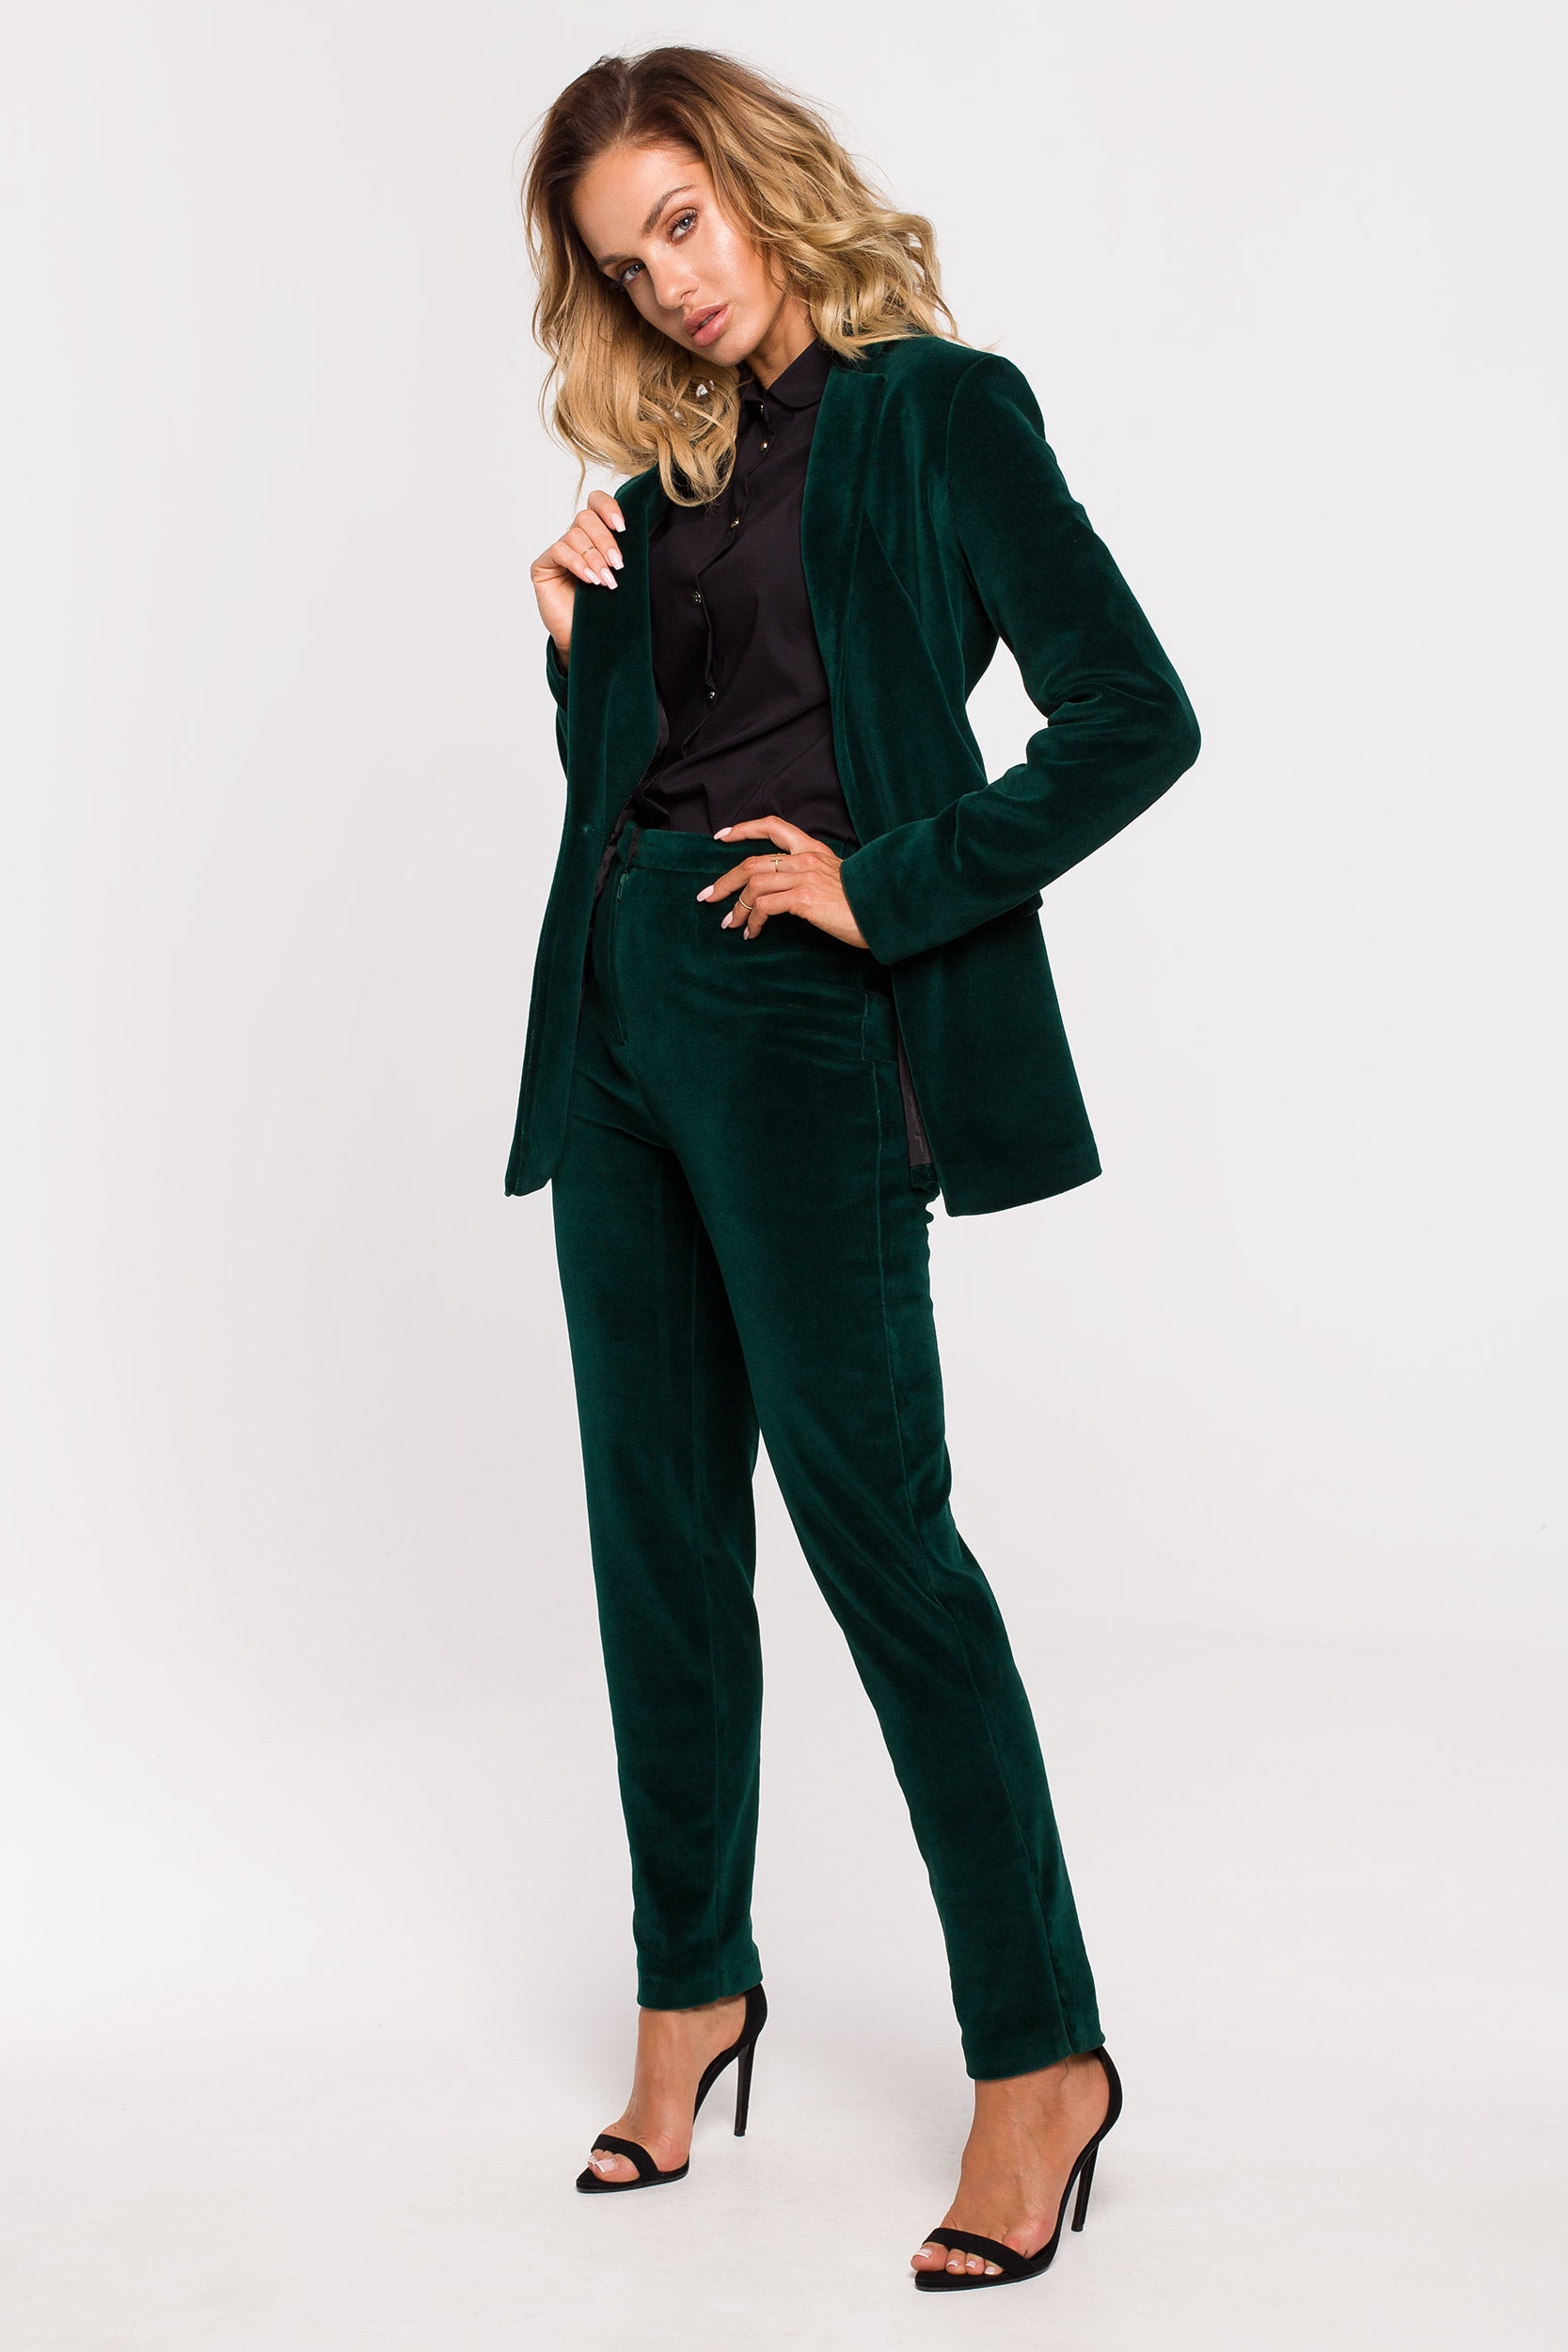 Buy Green Velvet Trousers Suit Separate at Strictly Influential